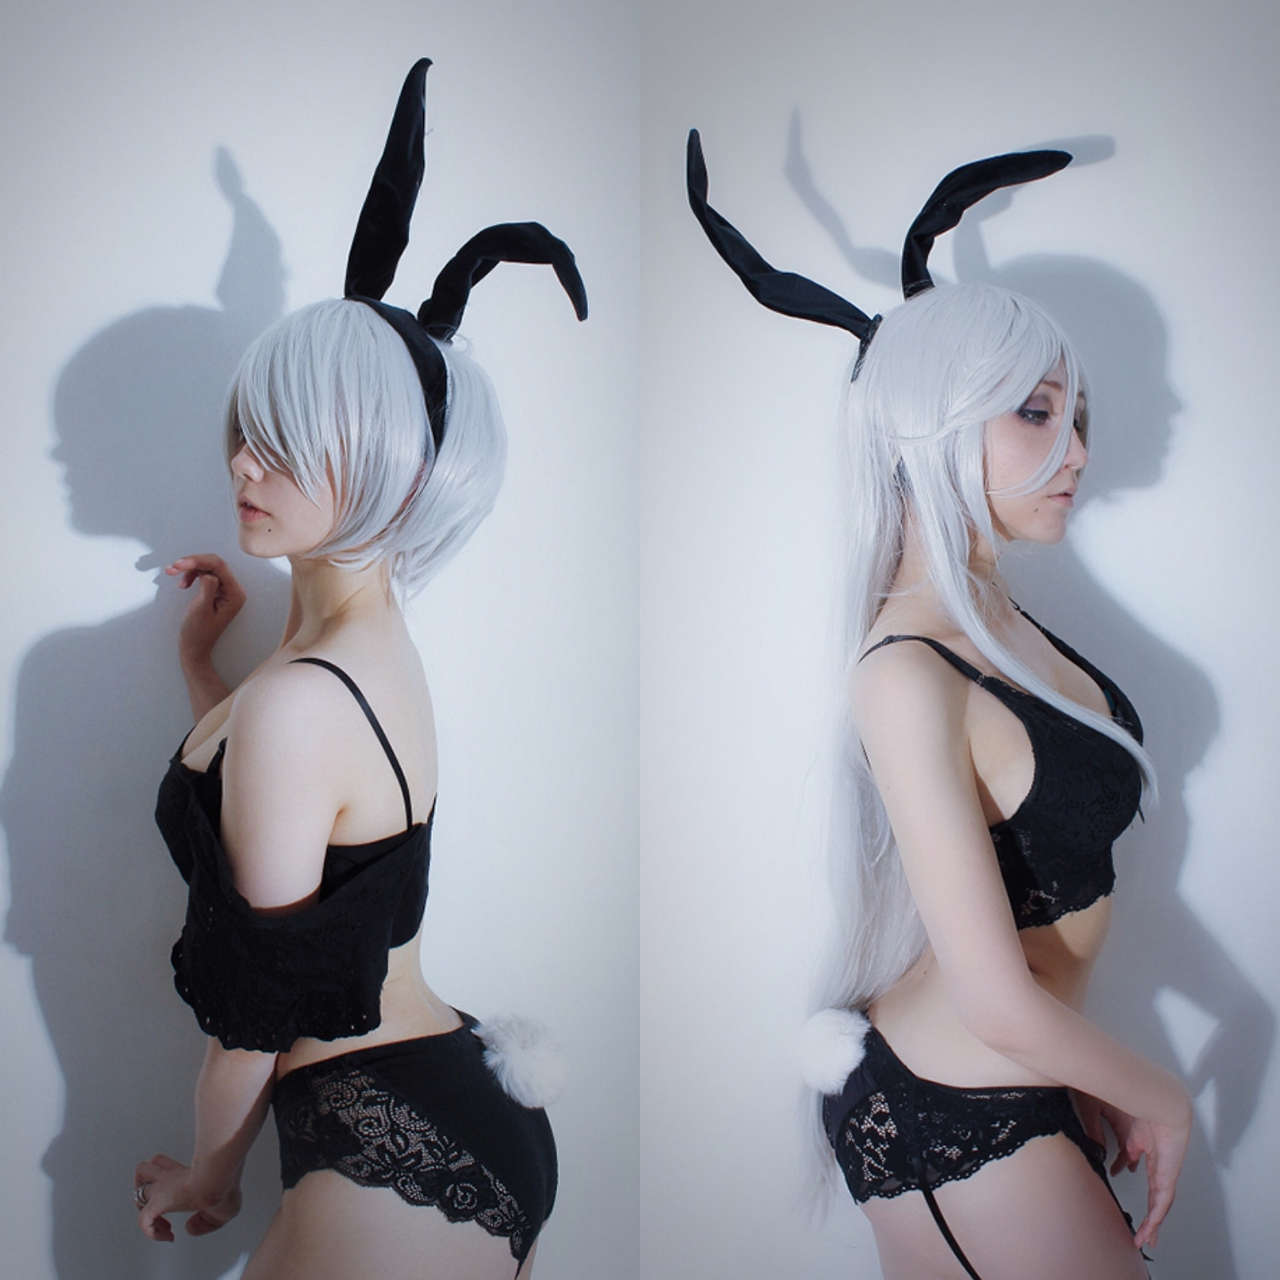 2b Andamp A2 Bunnygirl Ver By Ashe Rox And Jyu San Sel